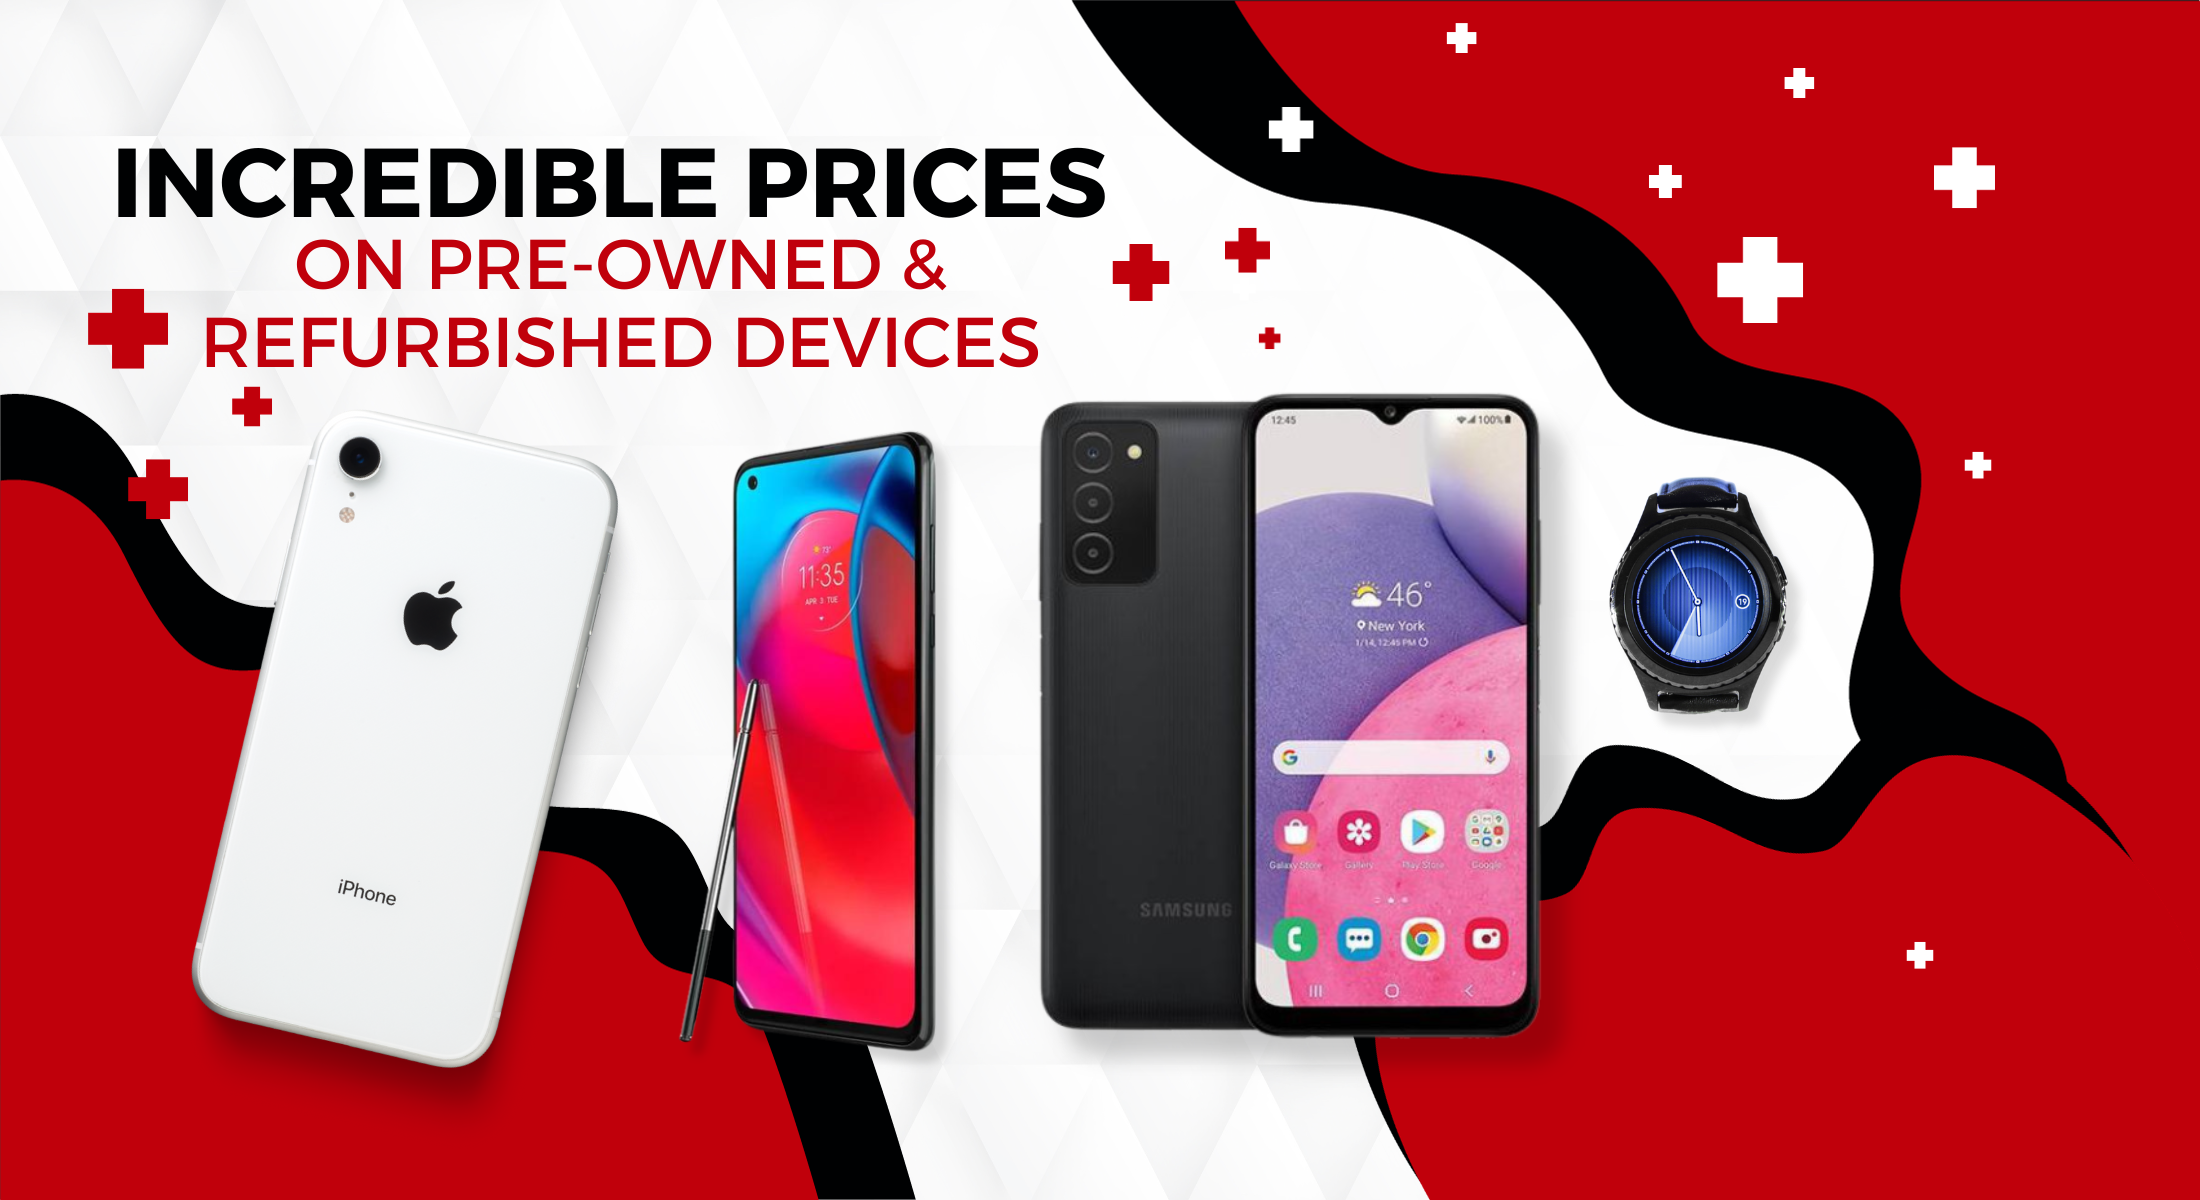 Dr. Phonez Banner for Incredibly Priced Pre-Owned and Refurbished Devices